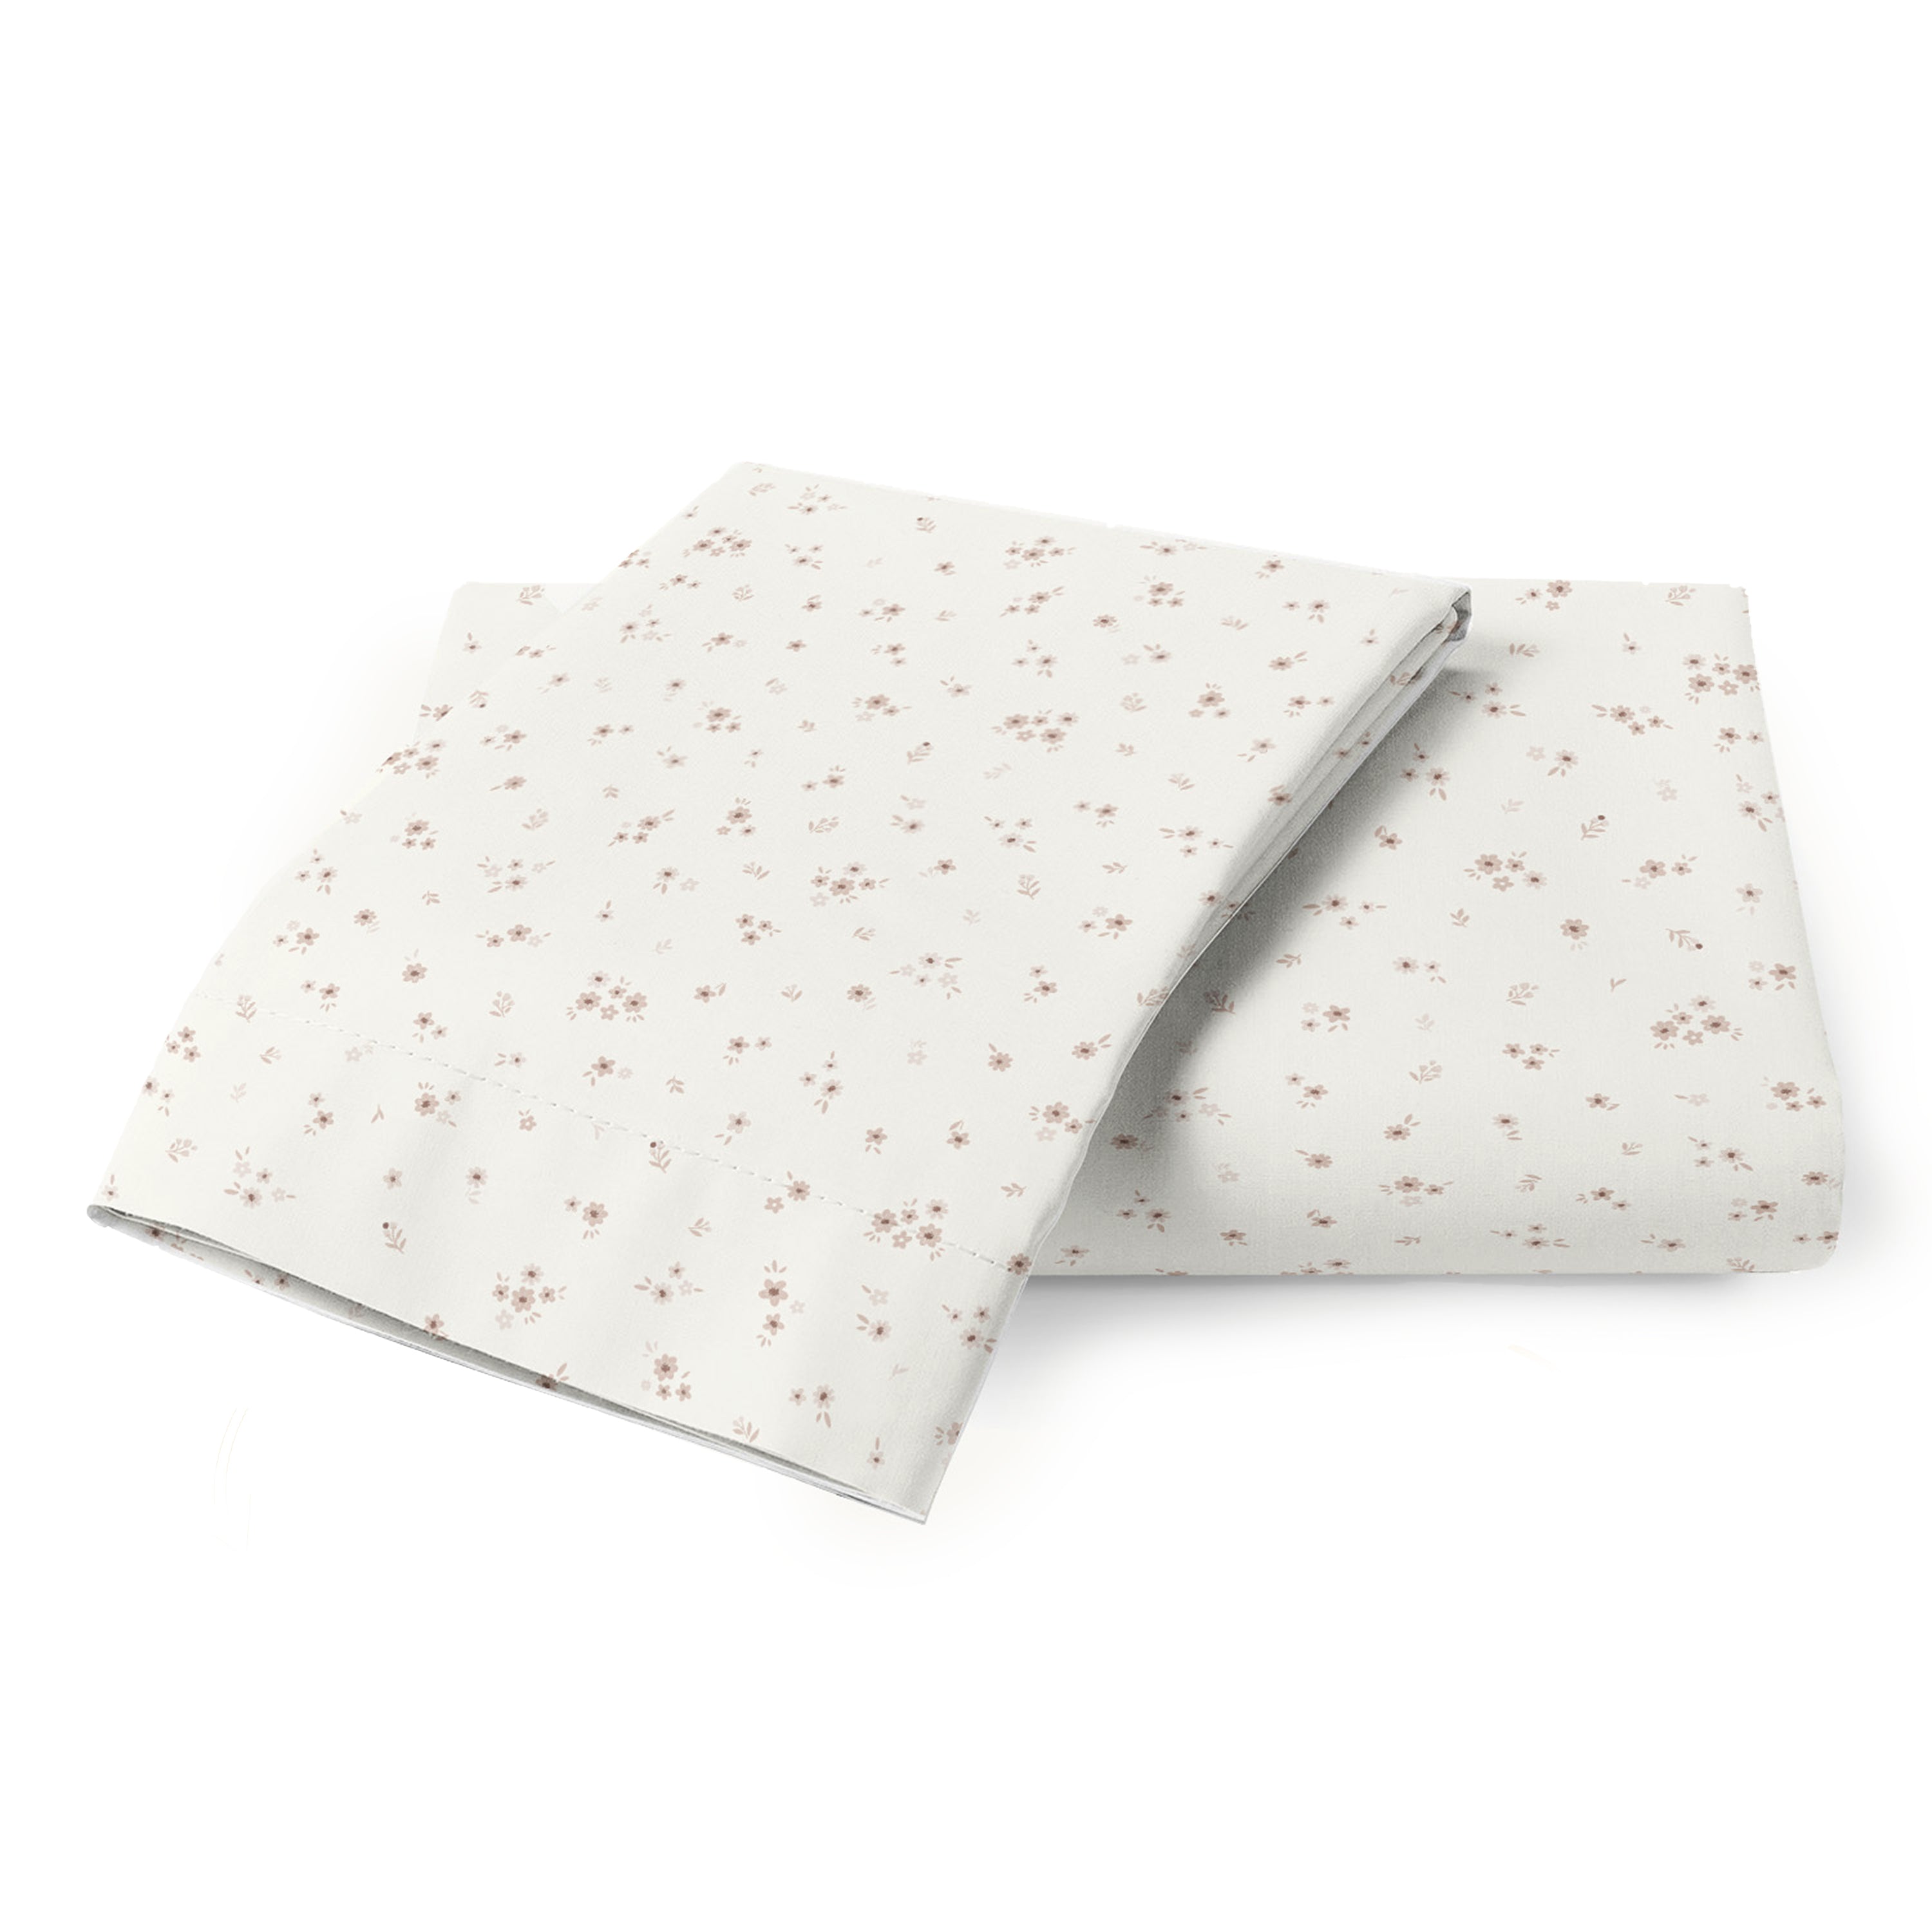 Two folded floral bedsheets with a small, delicate pink and brown flower pattern on a white background, presented on a light surface made of Makemake Organics' Organic Cotton Toddler Pillowcase - Bloom.